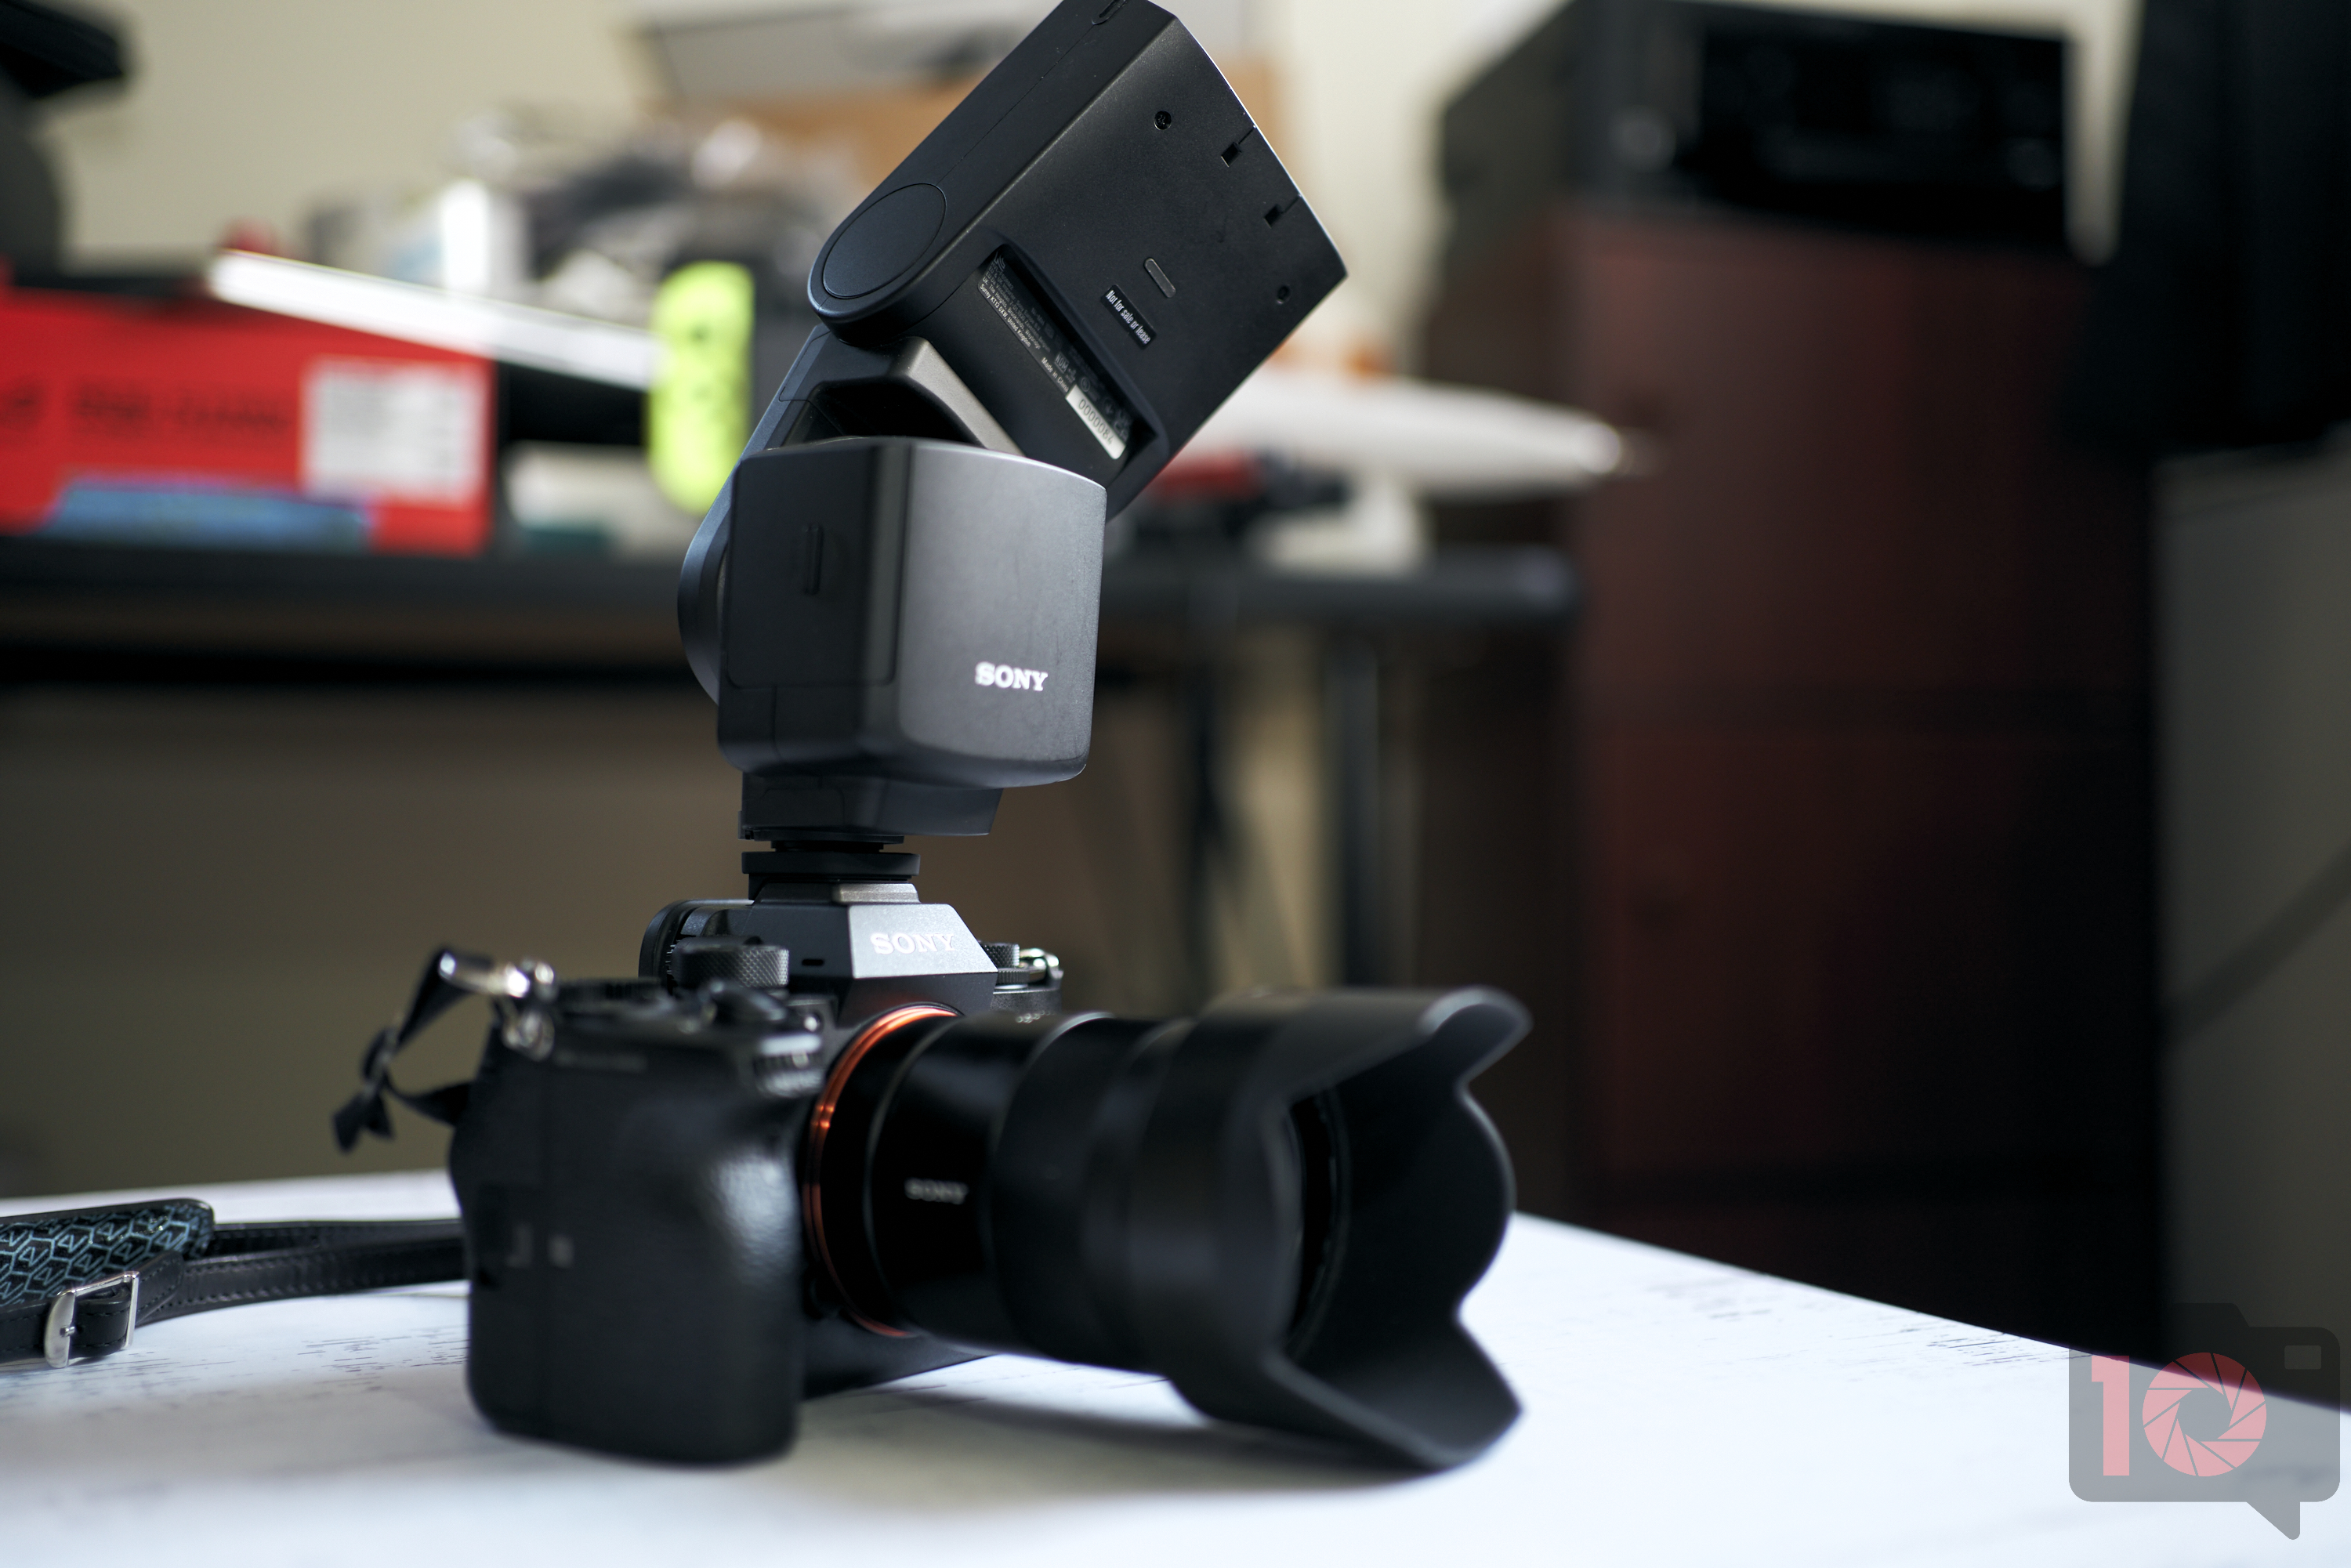 Sony announces two new flash units with improved continuous